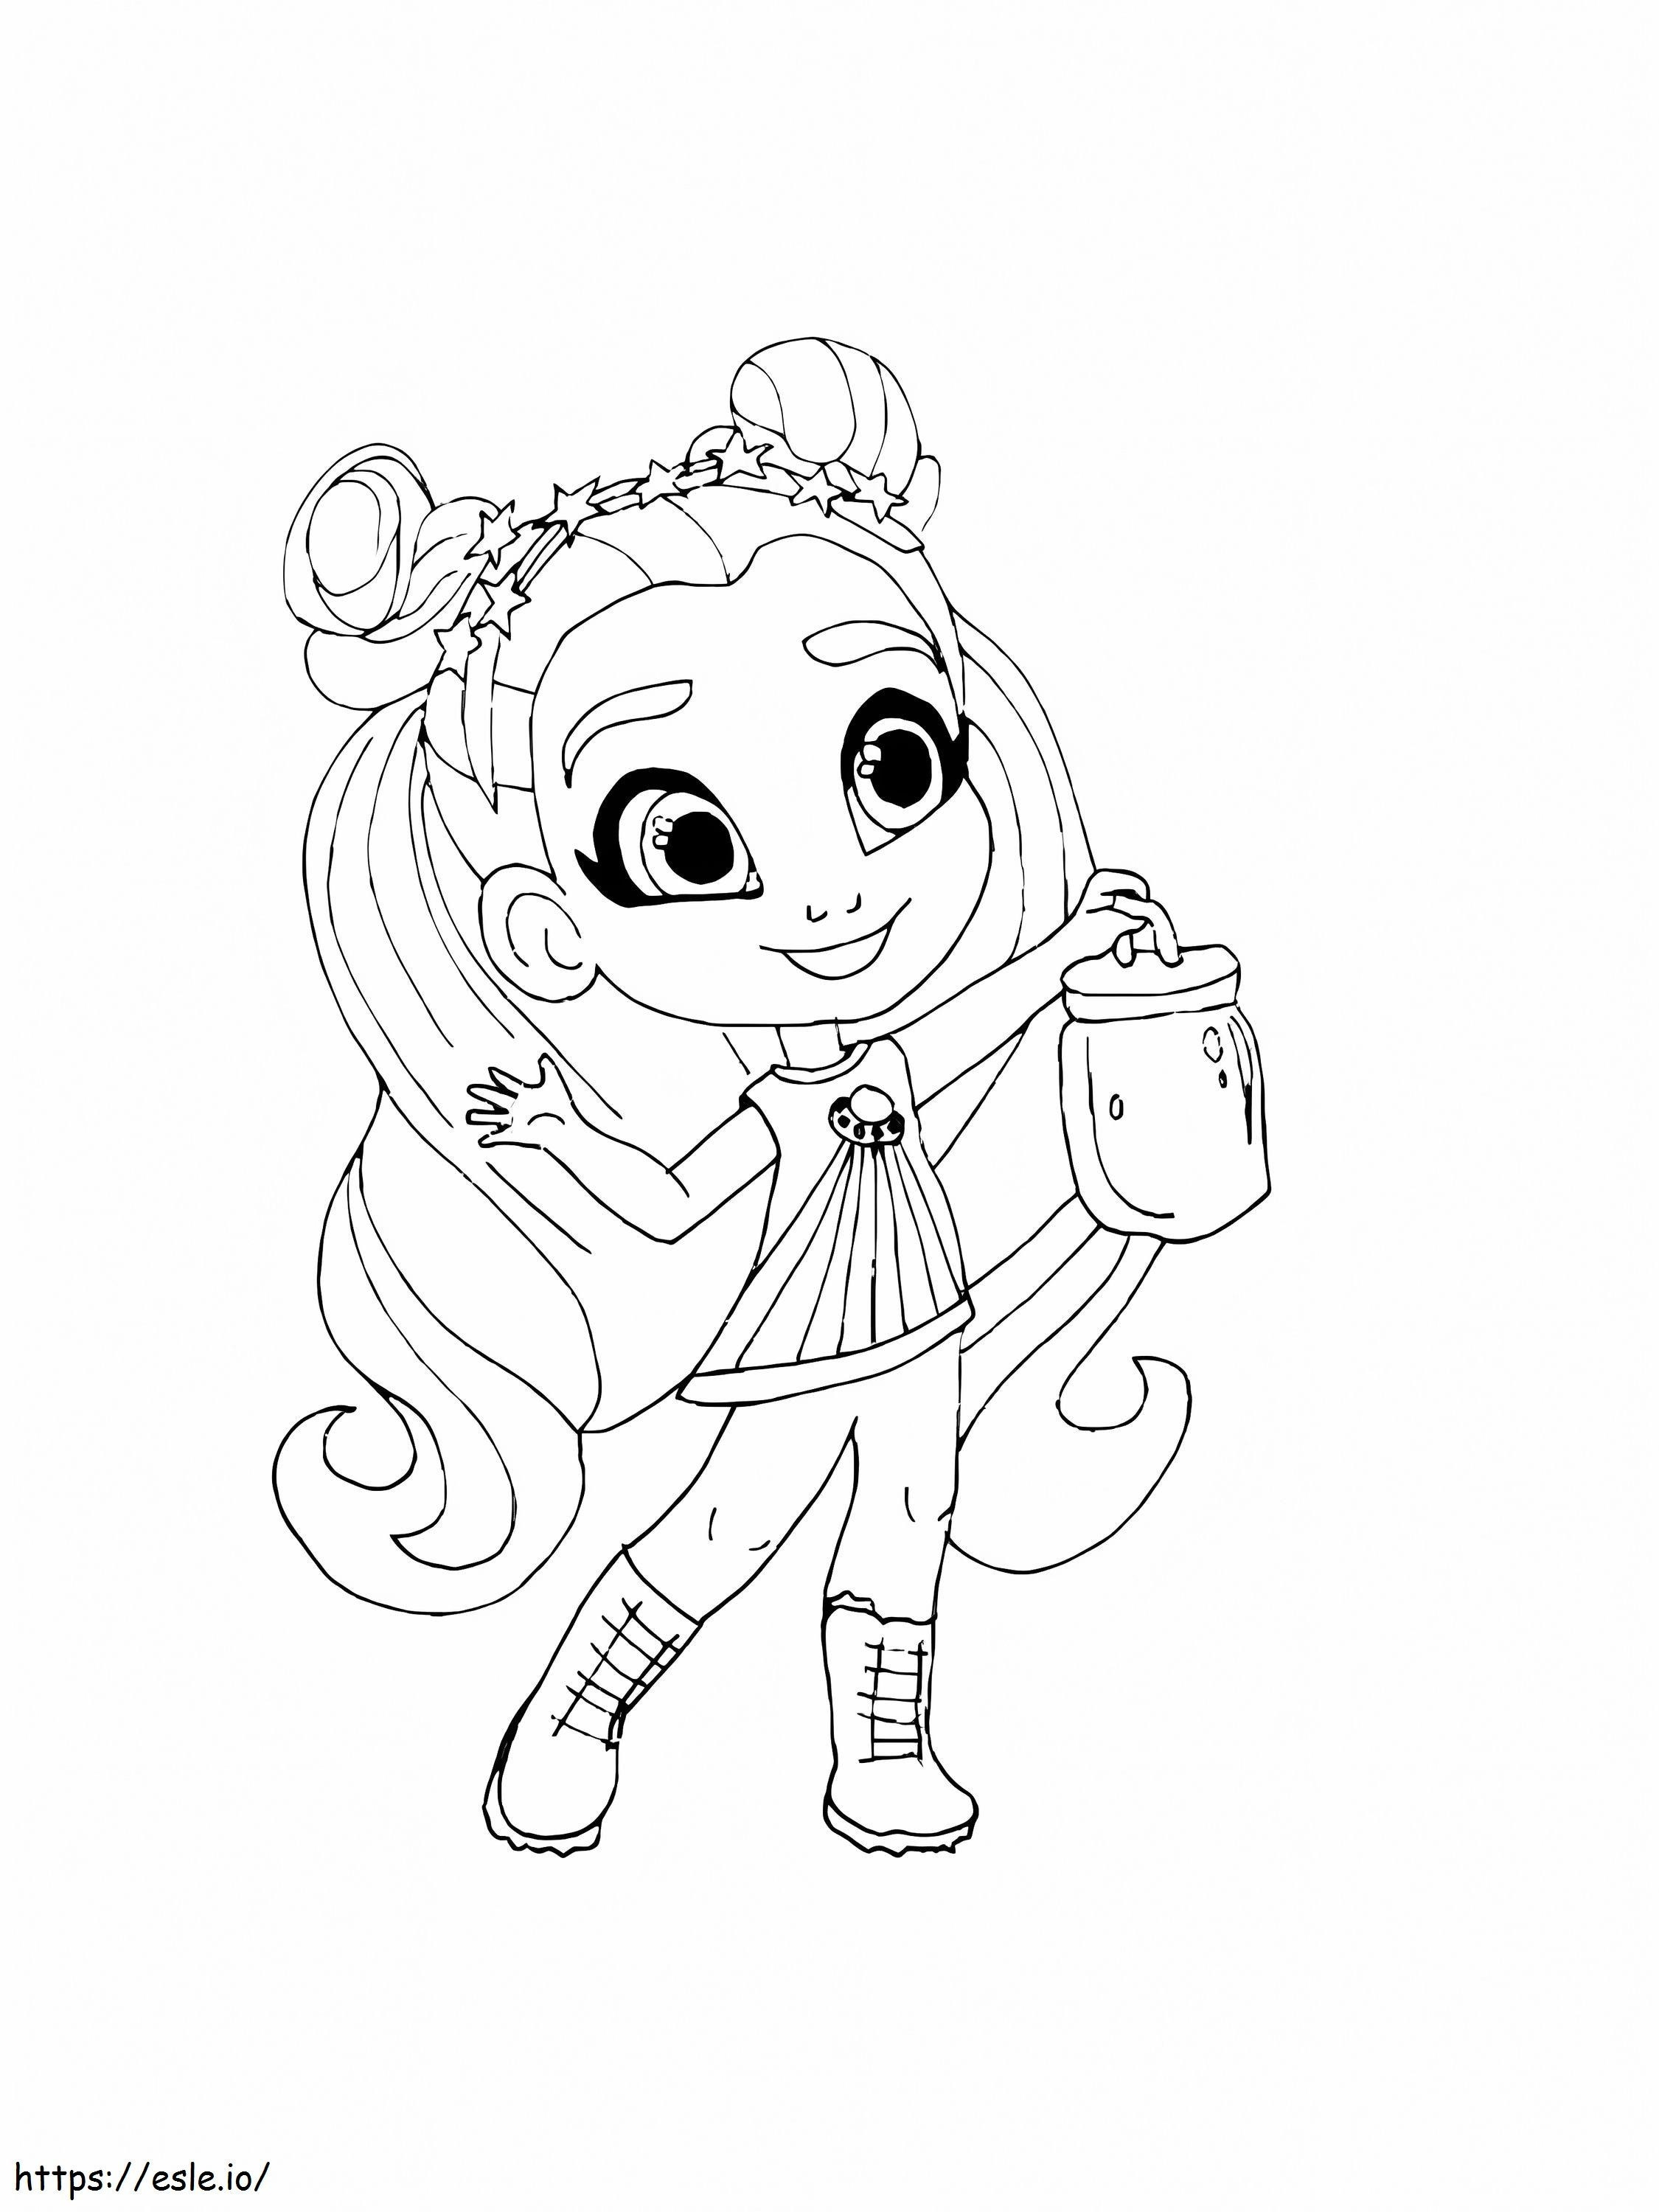 Hairdorables 4 coloring page